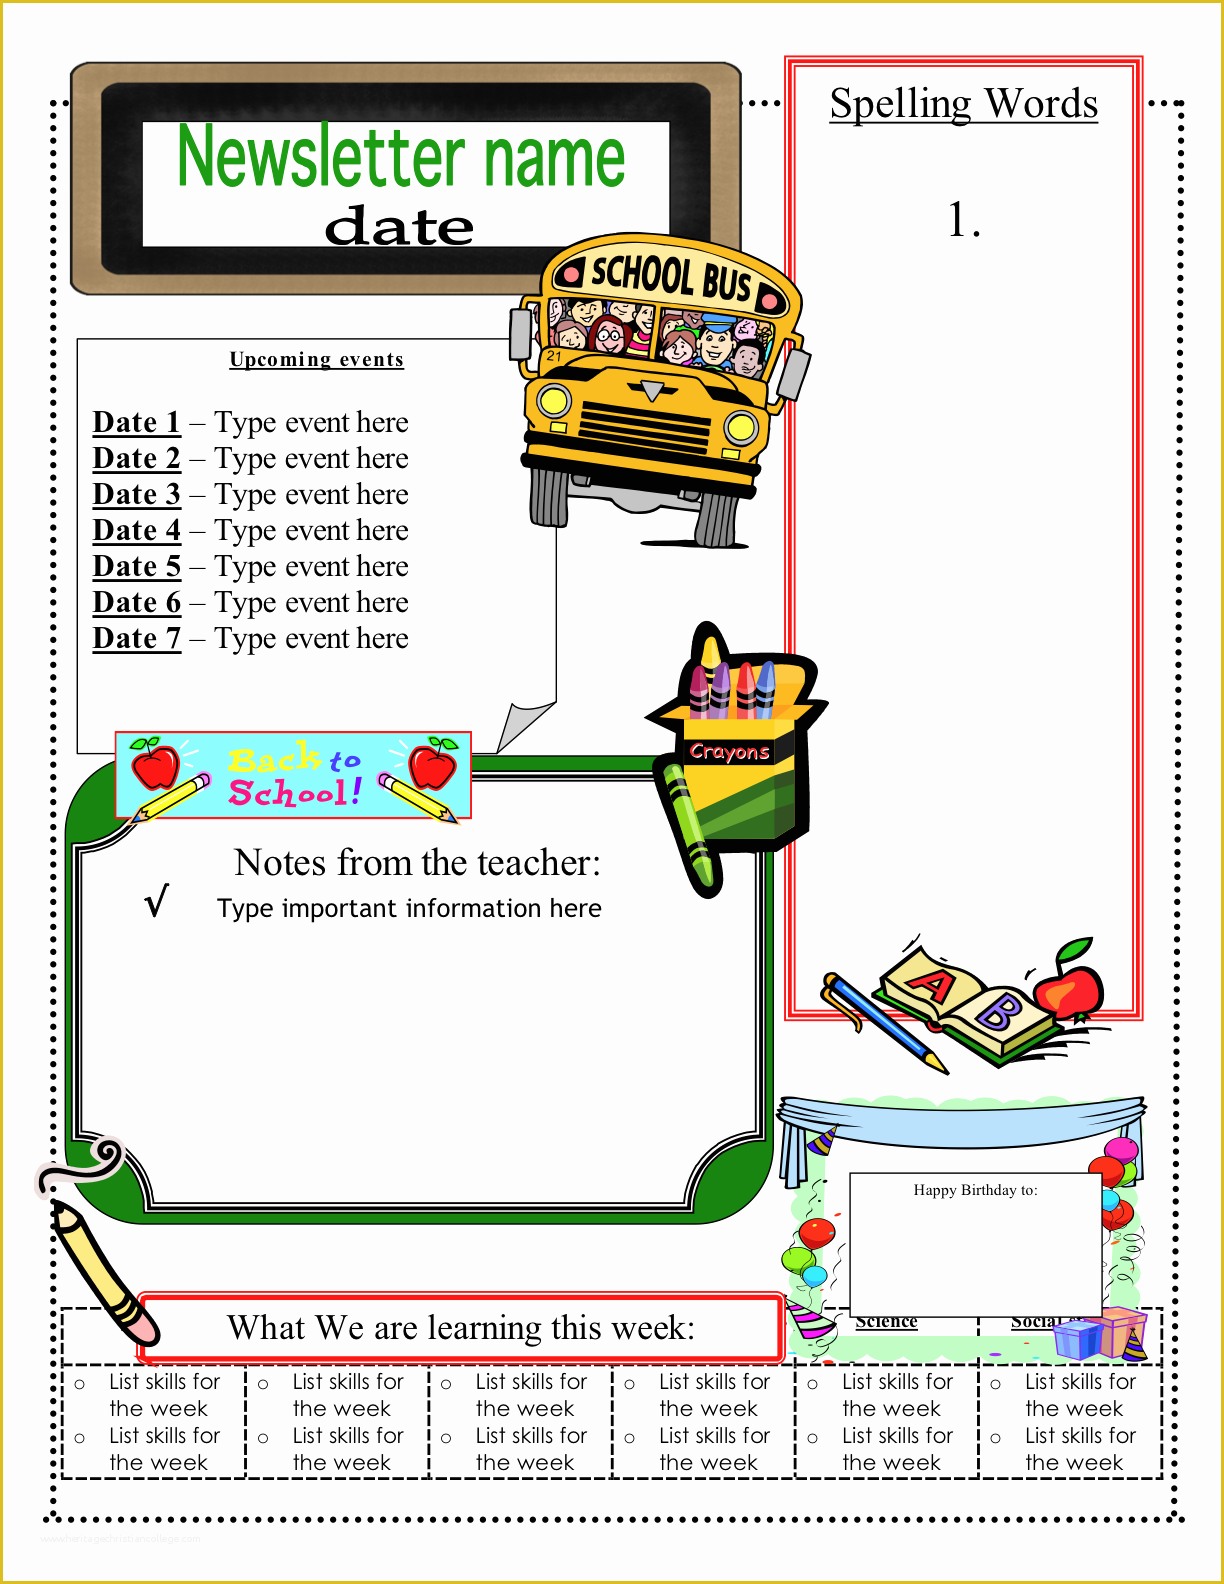 Free School Newsletter Templates for Publisher Of 3 6 Free Resources June 2012